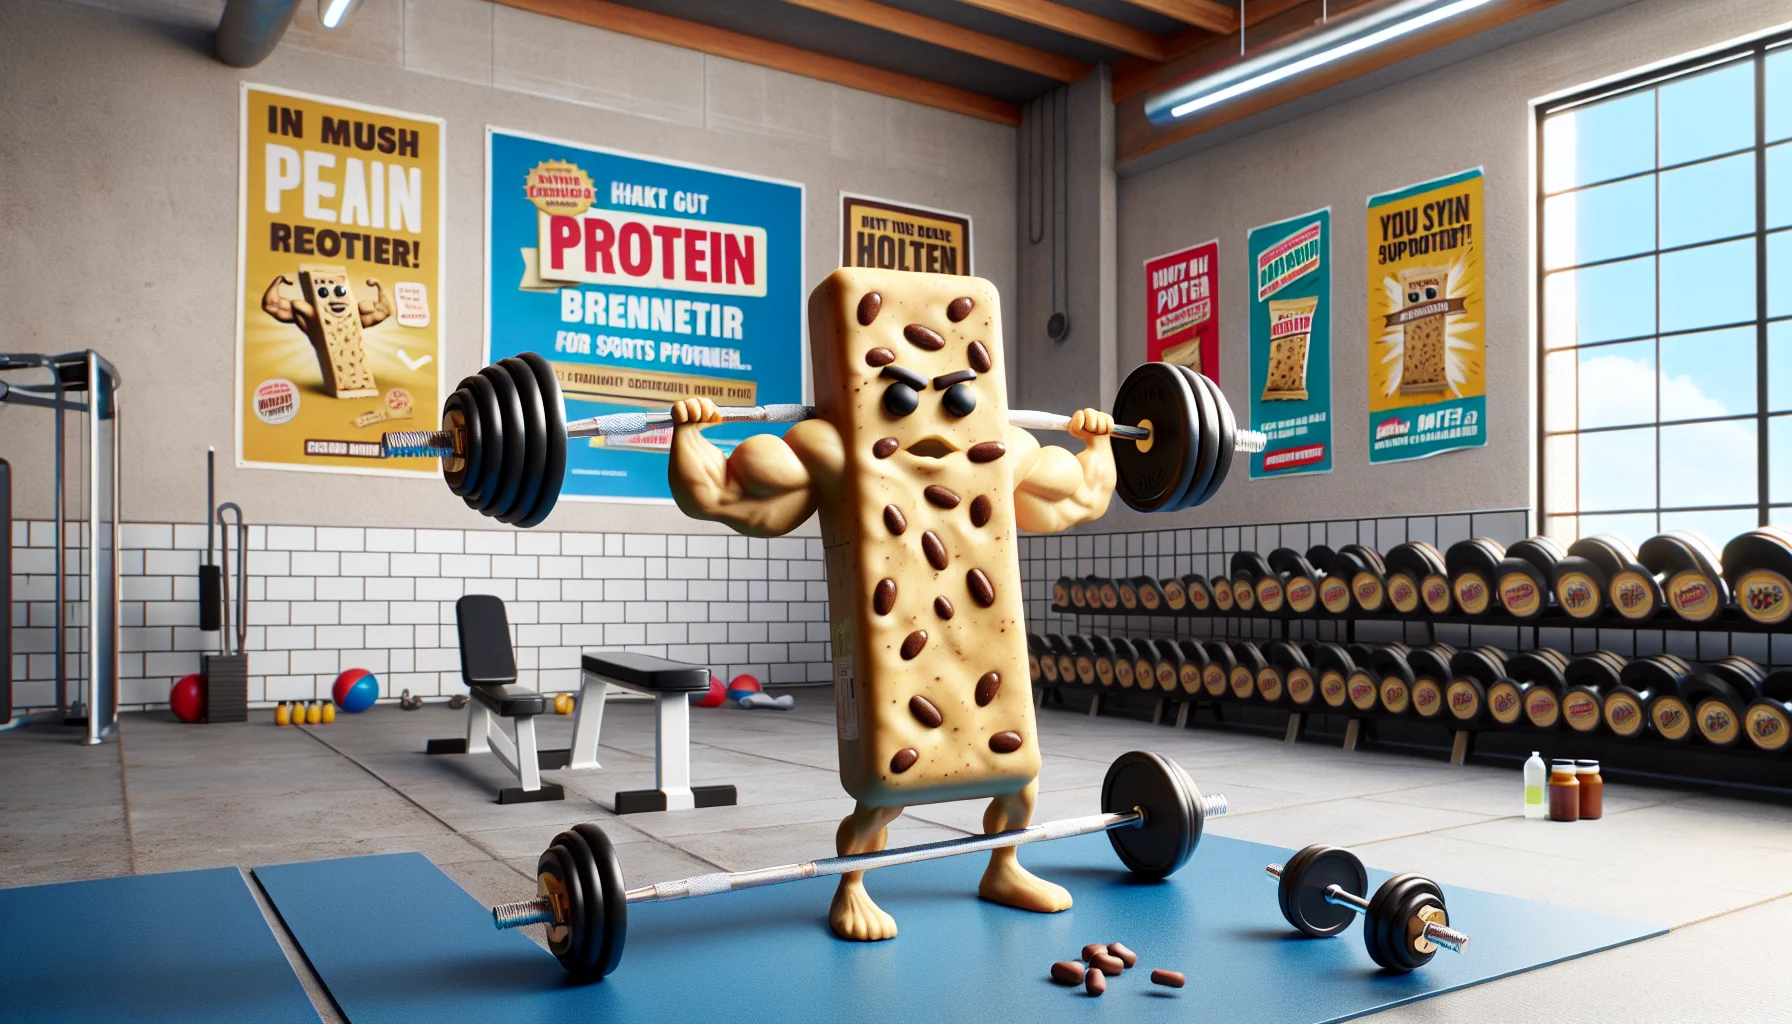 Create a humorous scene set at a local gym. Perhaps there's a protein bar doing dumbbell curls by itself, showing off a muscular structure that represents its high protein content. On the gym walls, there are banners and posters promoting the importance of dietary supplementation for sports performance. The objective is to make it playful and enticing for gym-goers, encouraging them to consider protein bars as a convenient way to boost their dietary protein intake for enhanced sports performance. Please make sure to emphasize the comedic aspect of this scene.